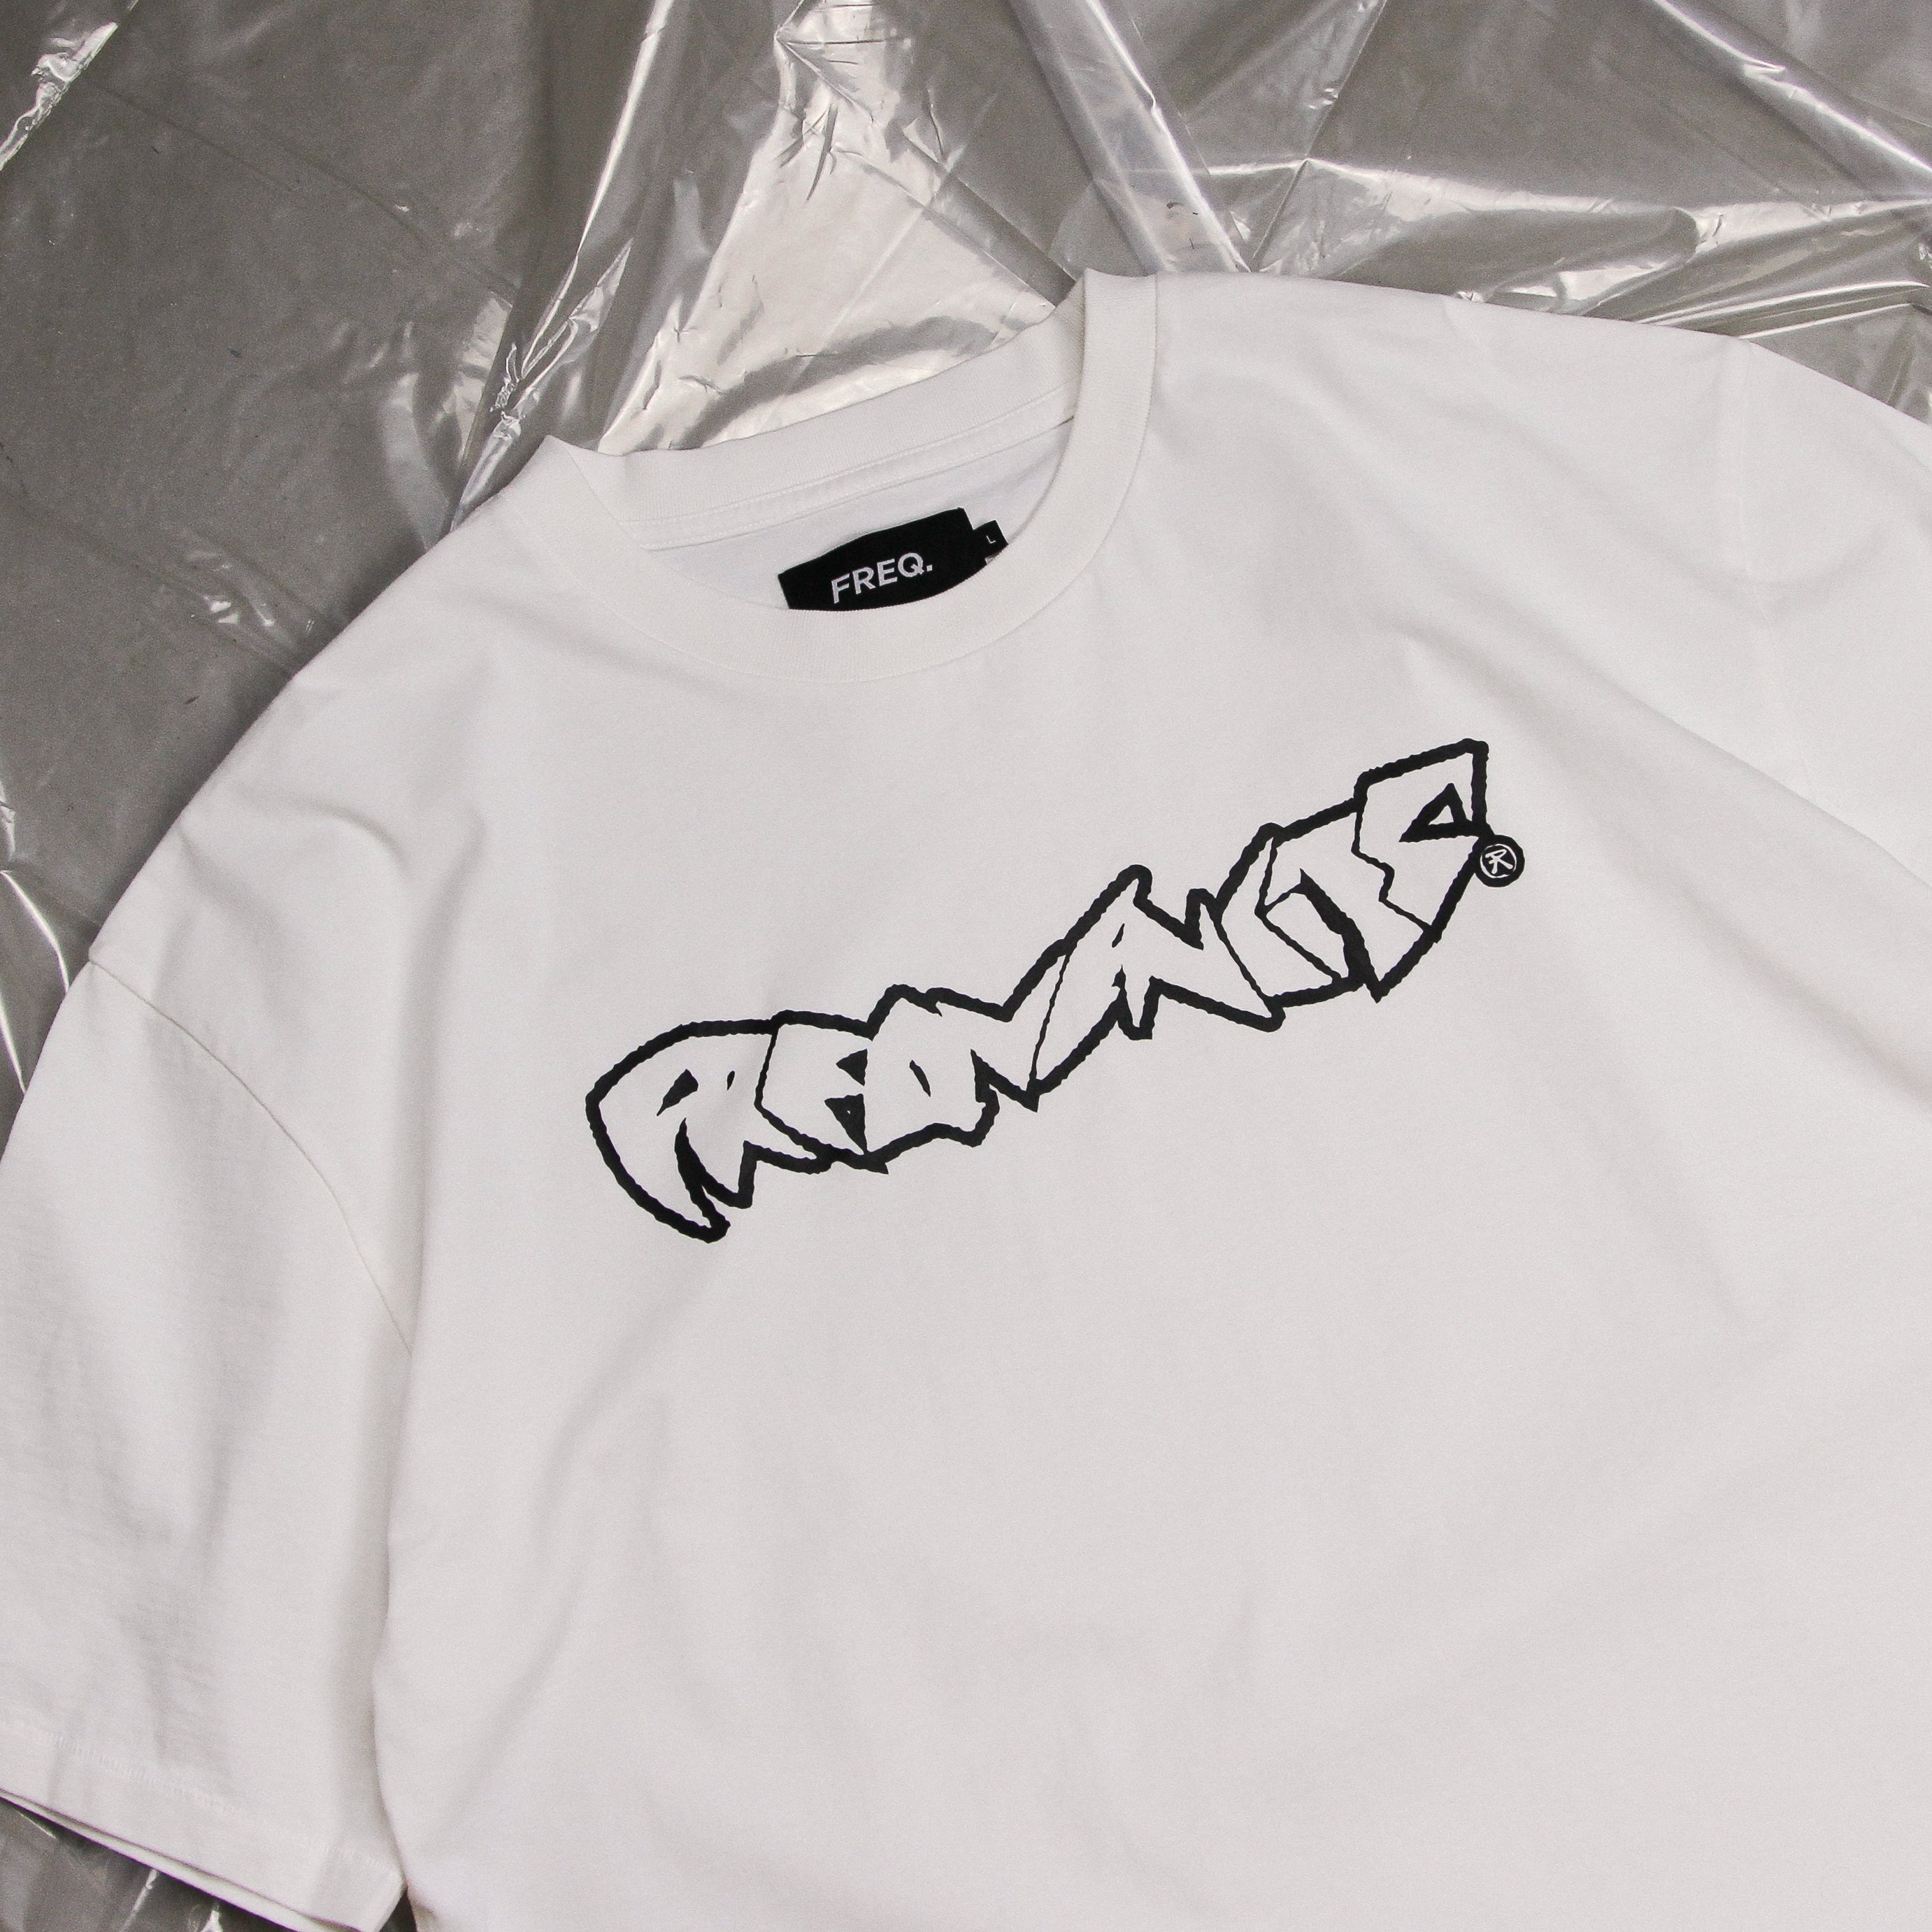 FRACTURE TEE - WHITE / BLACK